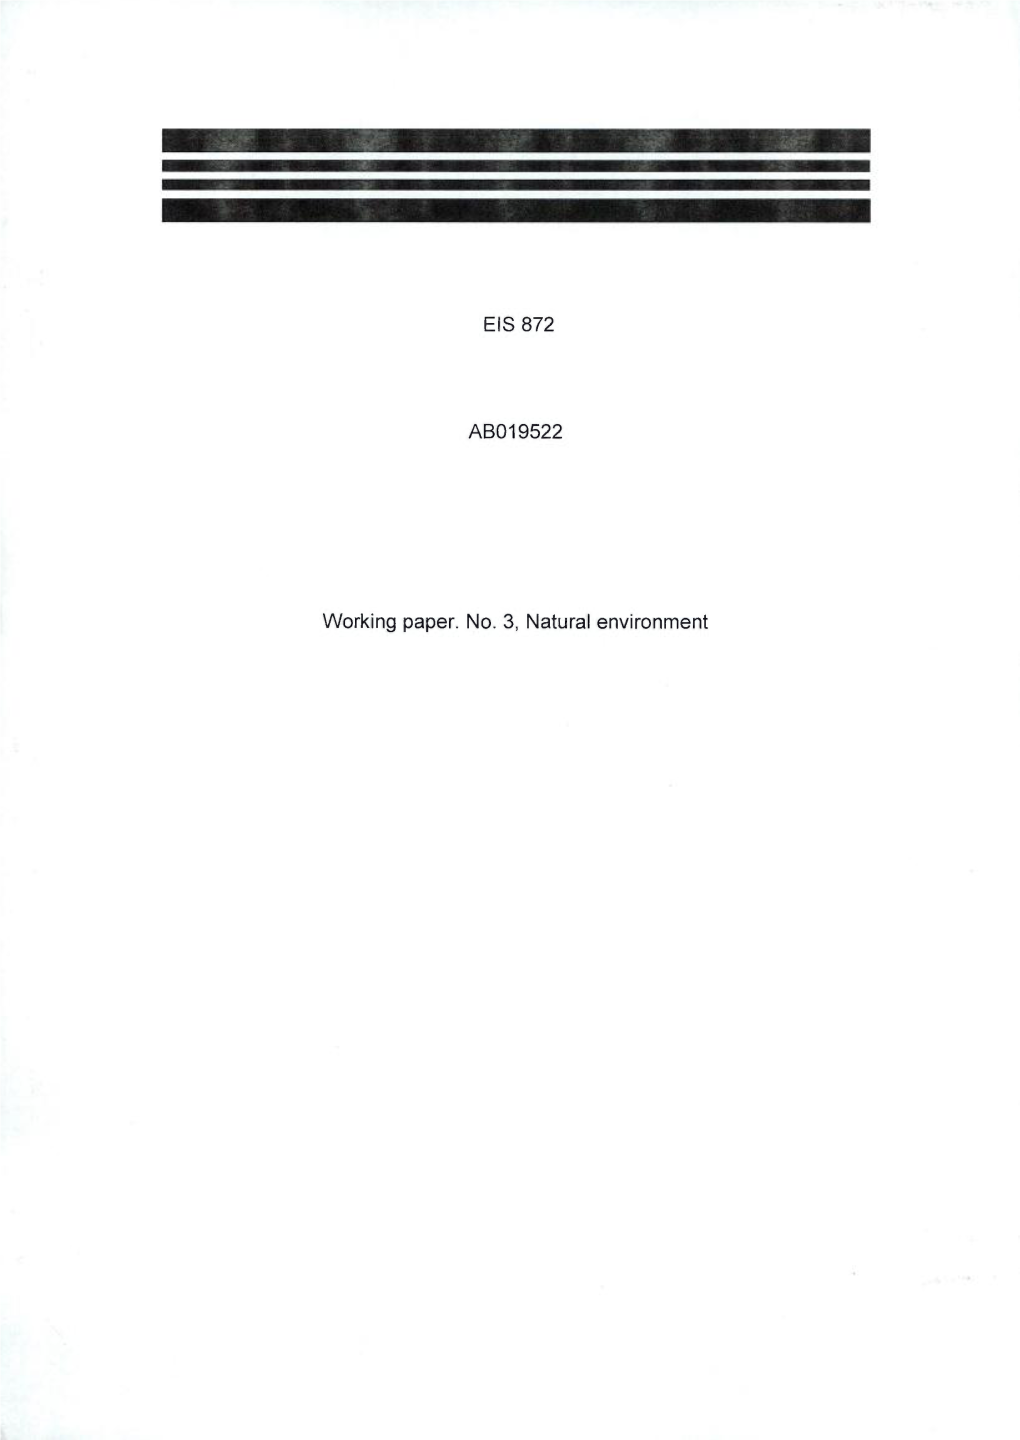 EIS 872 ABO1 9522 Working Paper. No. 3, Natural Environment